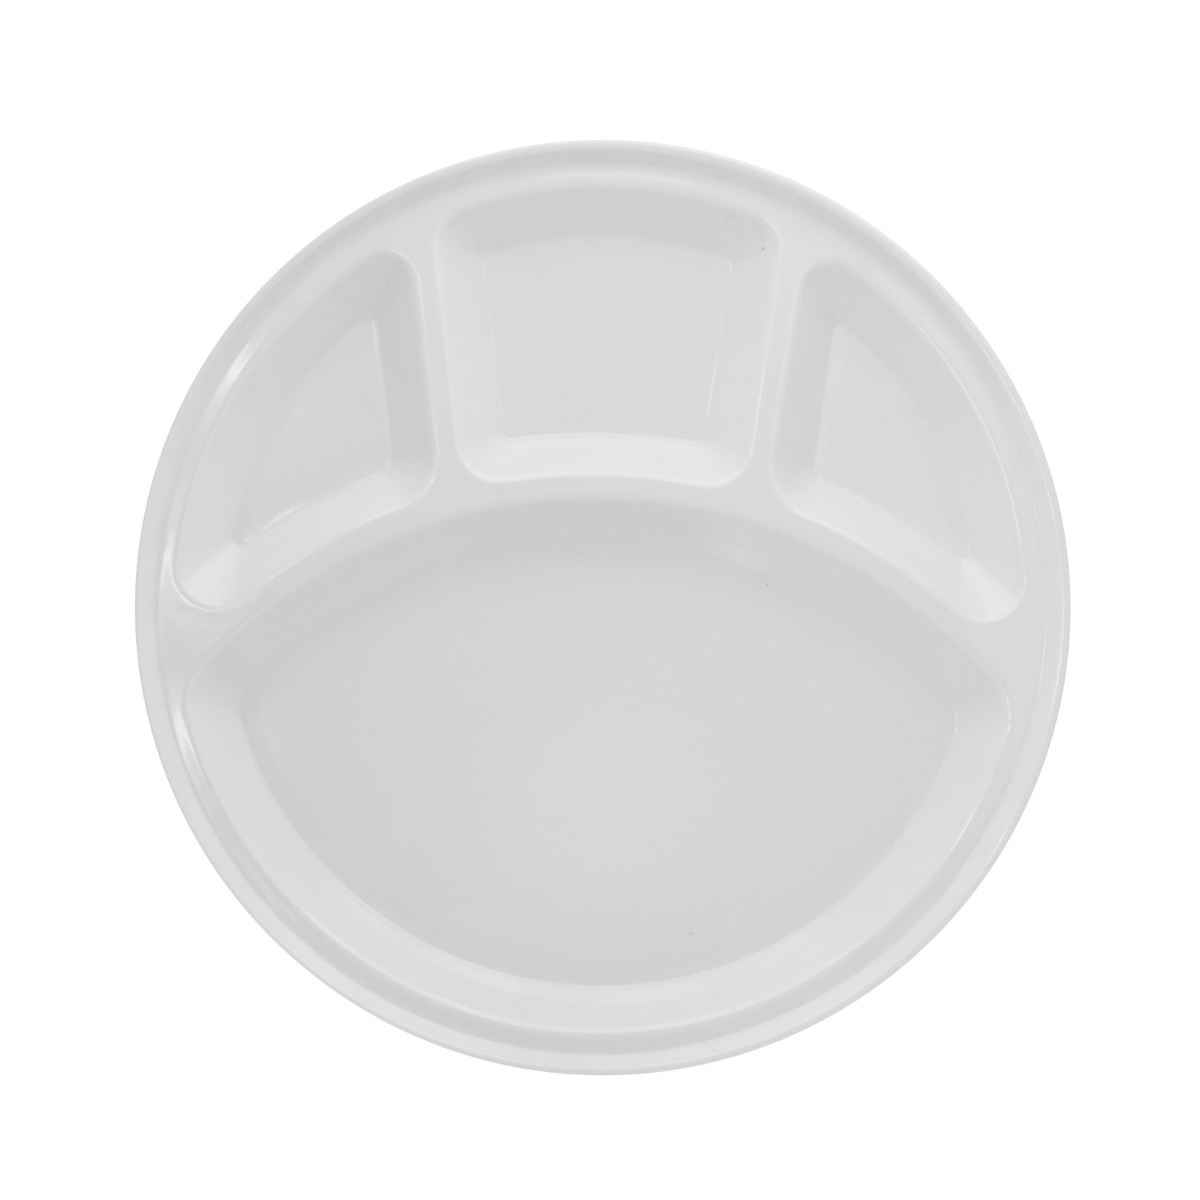 Dinewell Melamine 4 Partition Tray White